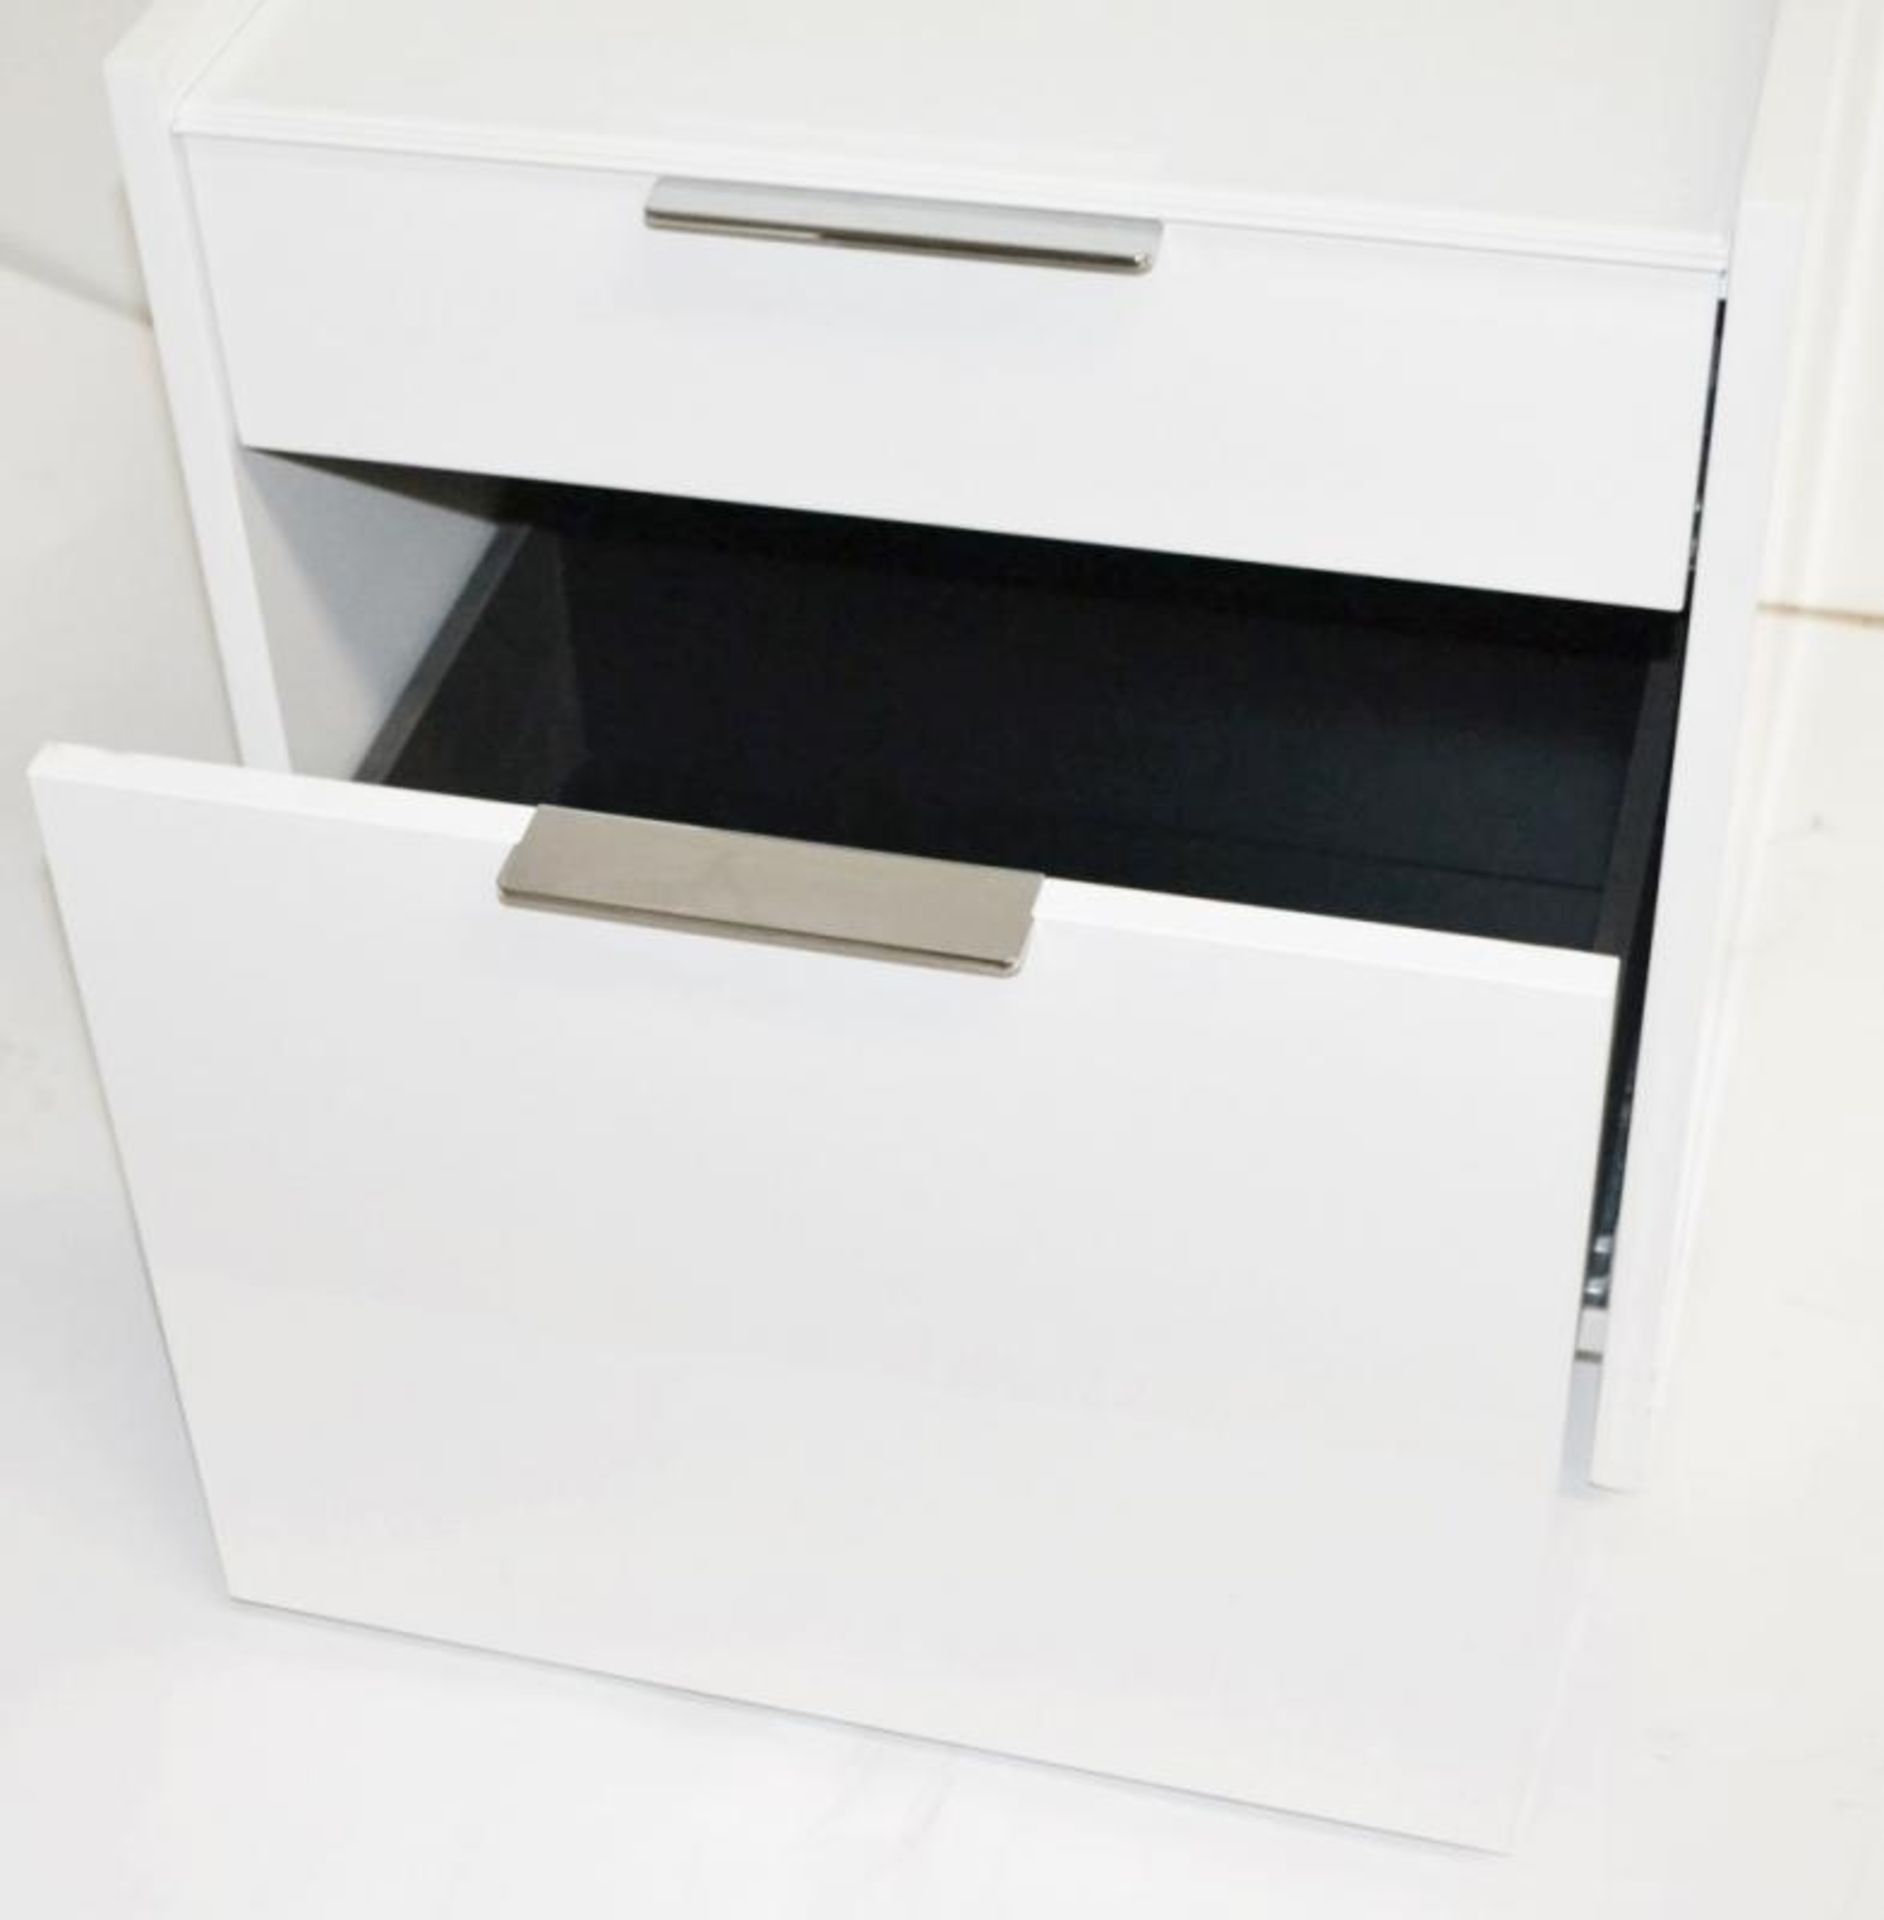 1 x LIGNE ROSET Hyannis Port Filing Cabinet - Ex-Display In Great Condition - Ref: 5687818 - CL087 - - Image 4 of 6